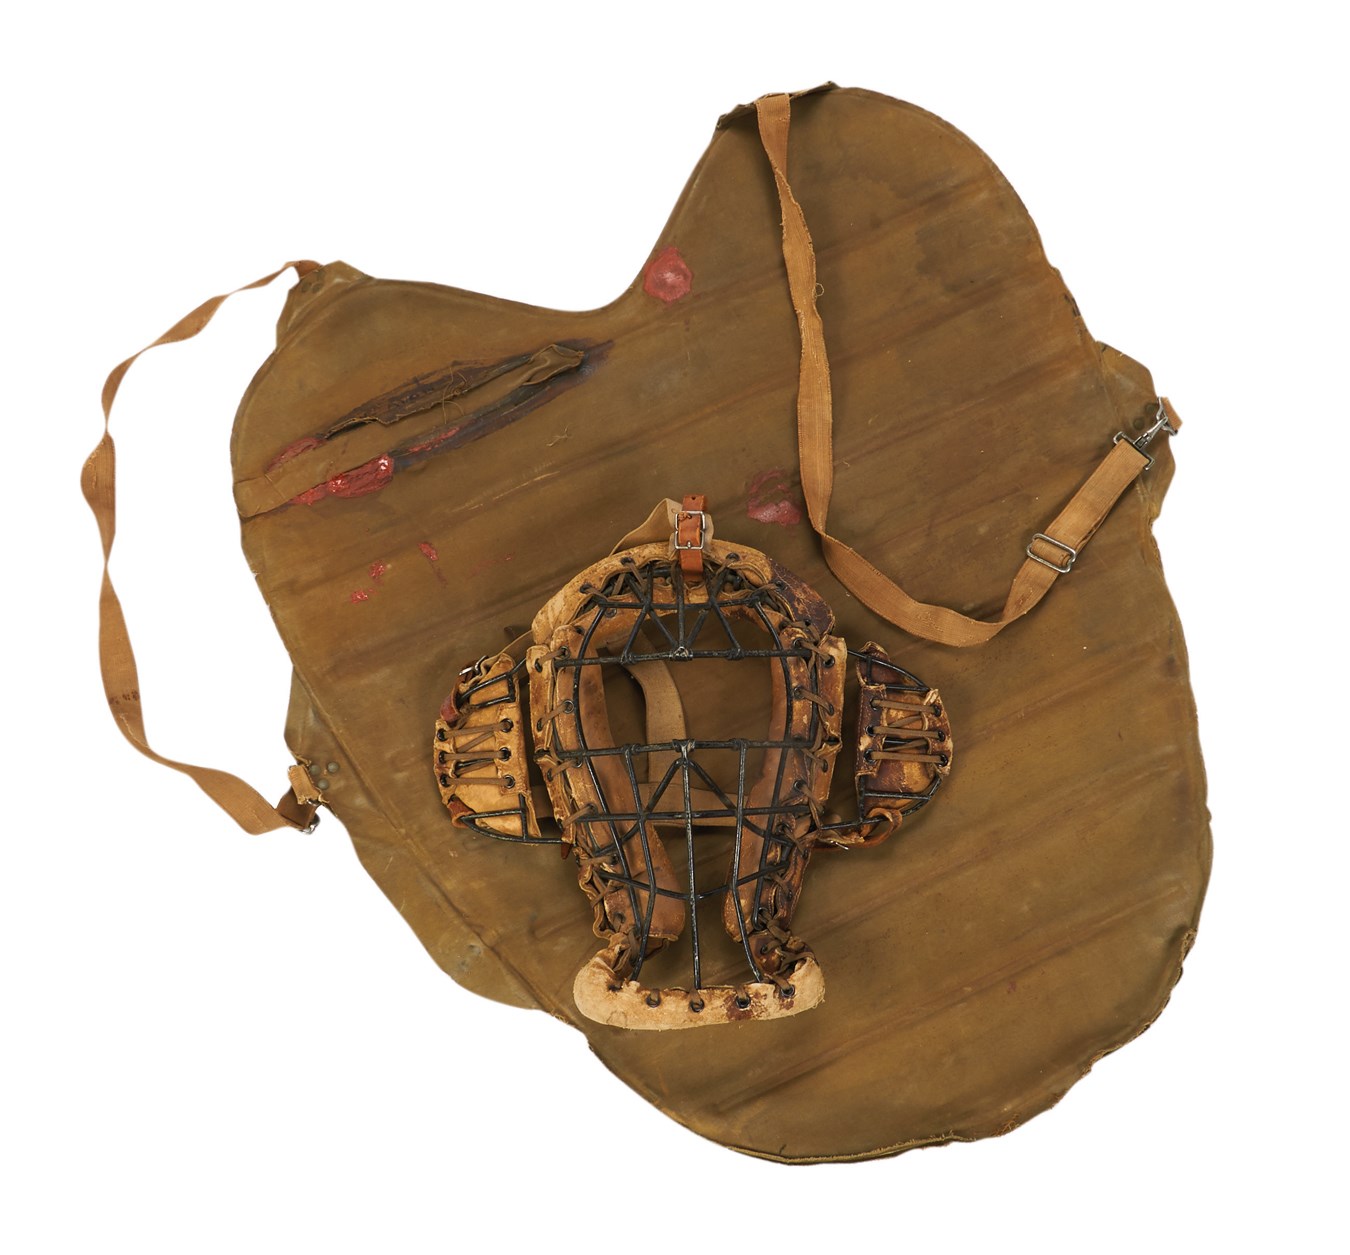 Antique Sporting Goods - Very Rare Circa 1910s Umpire's Mask and Inflatable Chest Protector